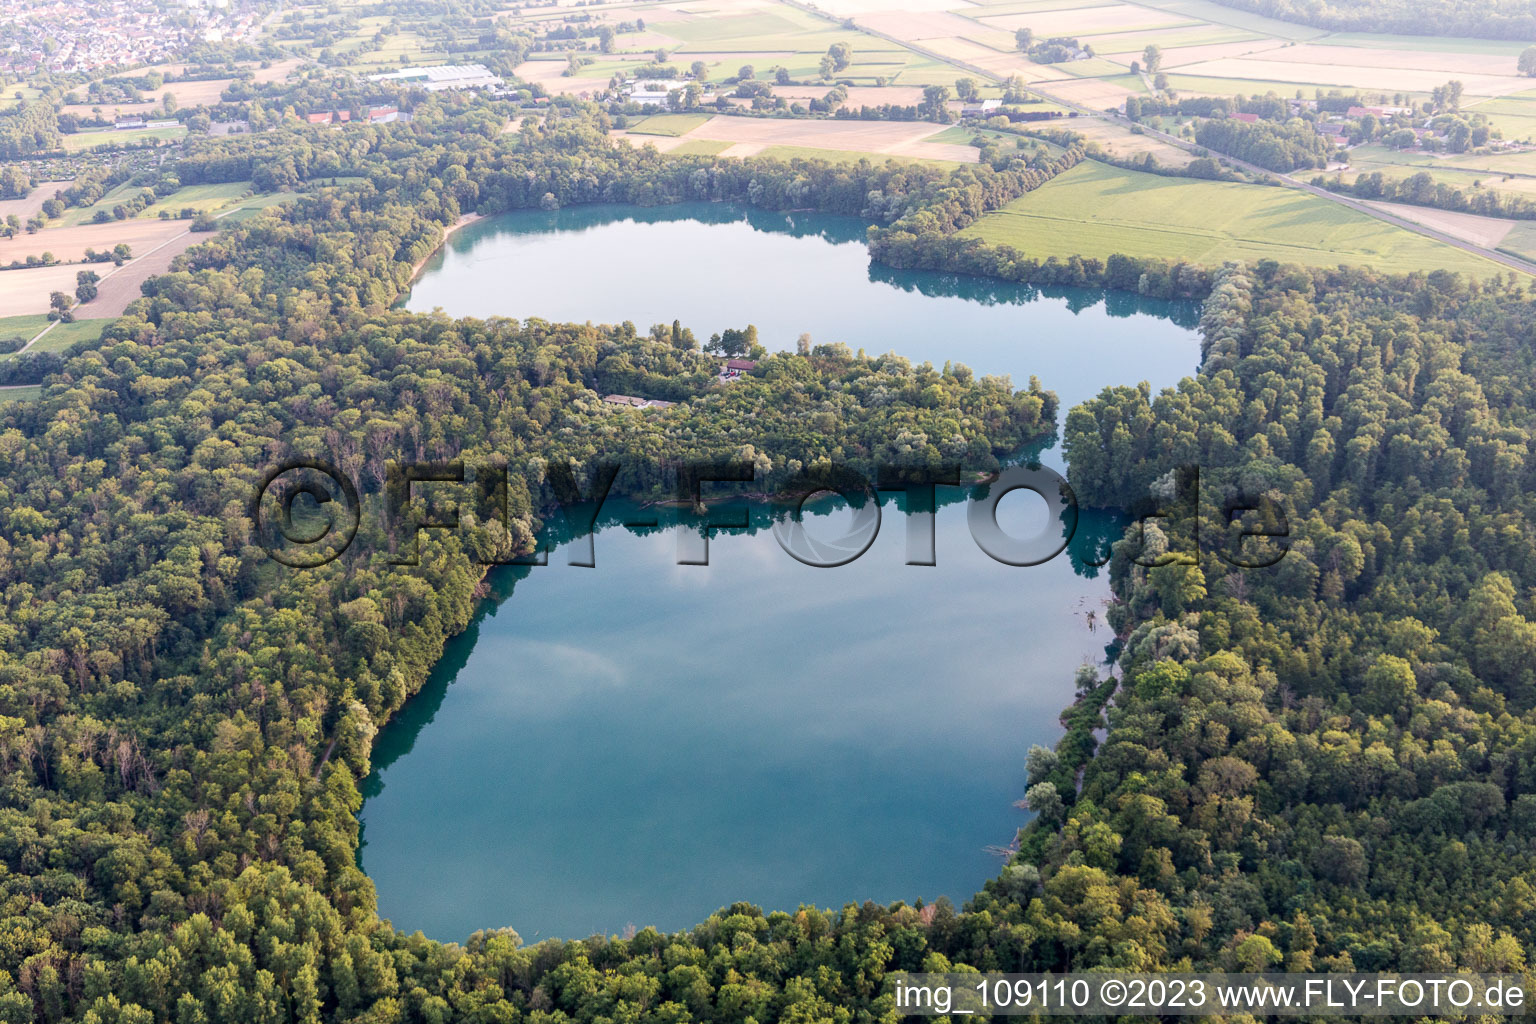 Quarry pond in the district Grötzingen in Karlsruhe in the state Baden-Wuerttemberg, Germany